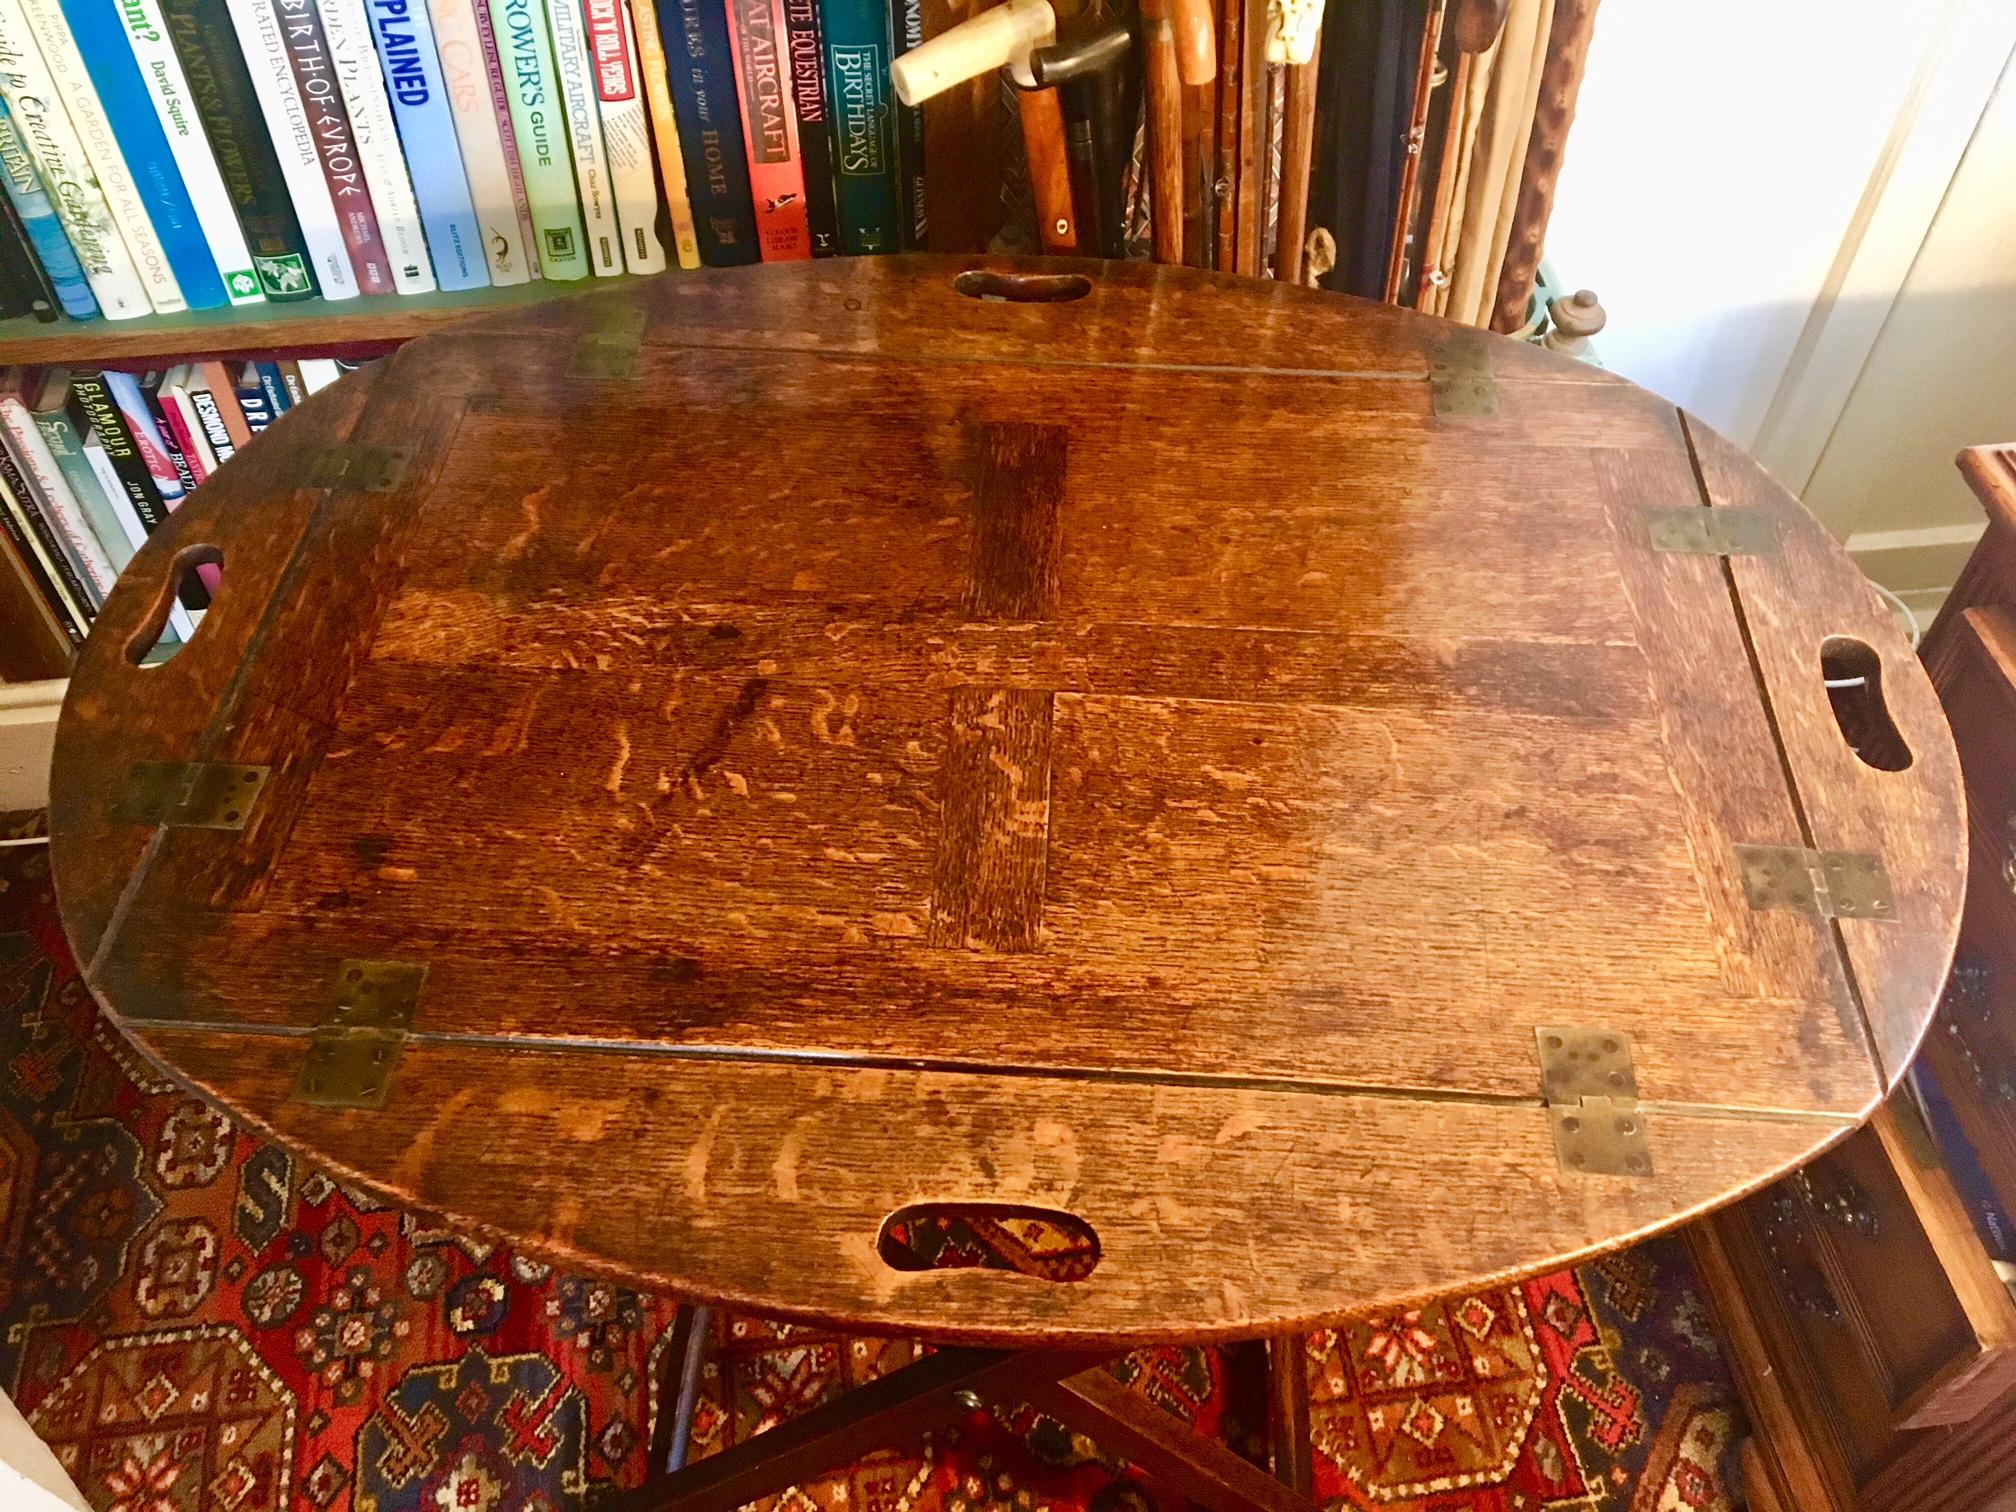 Fine quality Georgian butlers tray on original stand in oak, English, circa 1800.
This oak folding butlers tray is in superb condition and retains
a mellow patina. Well looked after, it is free of any damage or repairs. The stand has at some
time